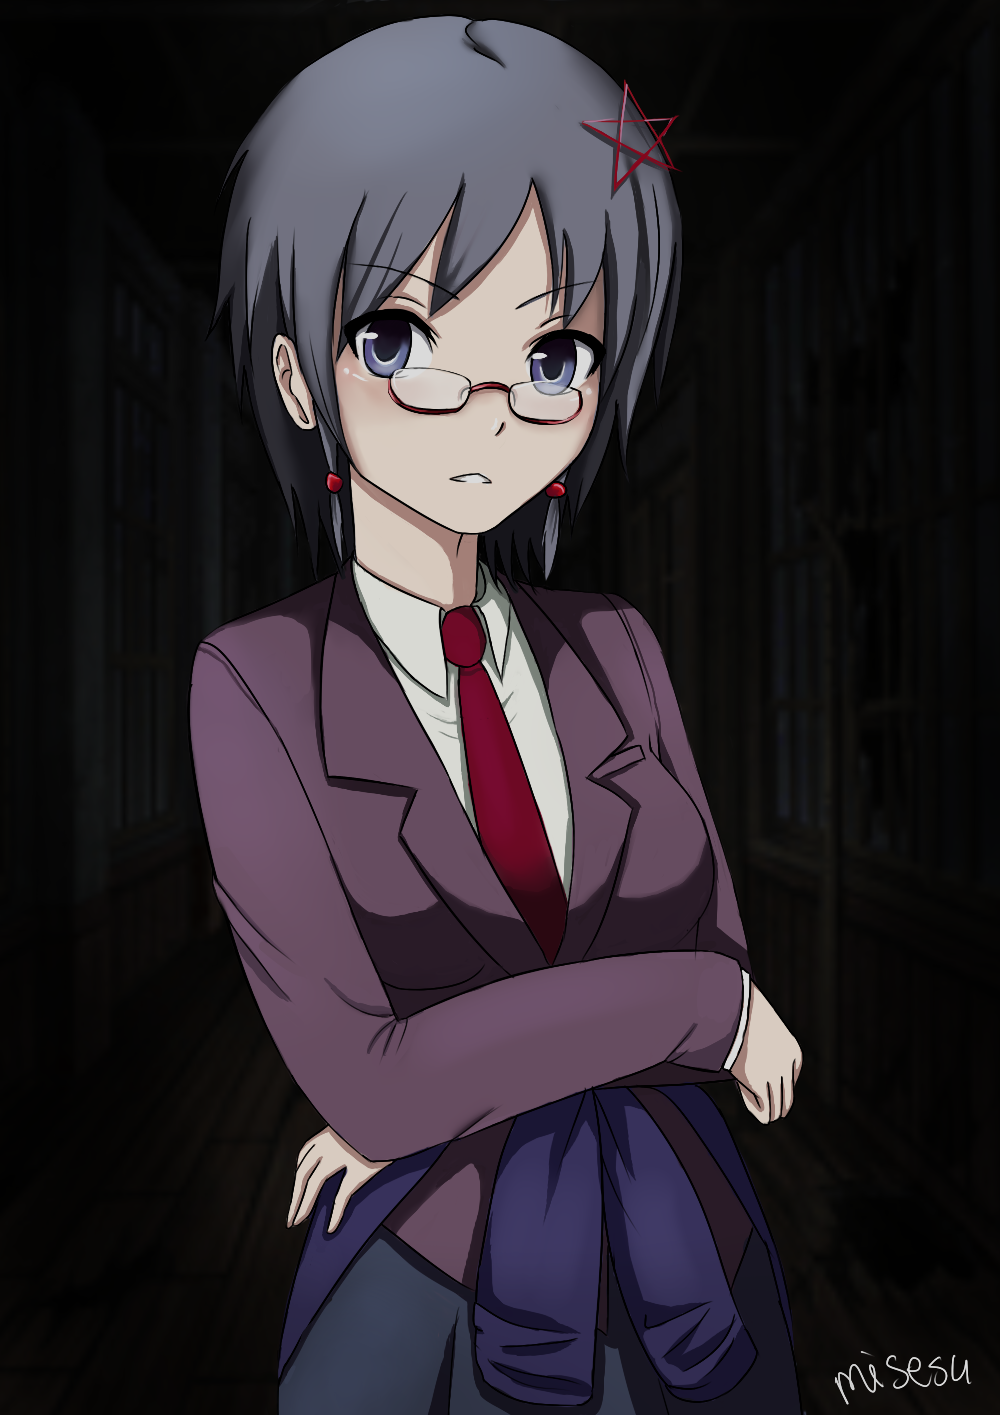 corpse party Saenoki. Corpse party, Corpse, Girls with glasses